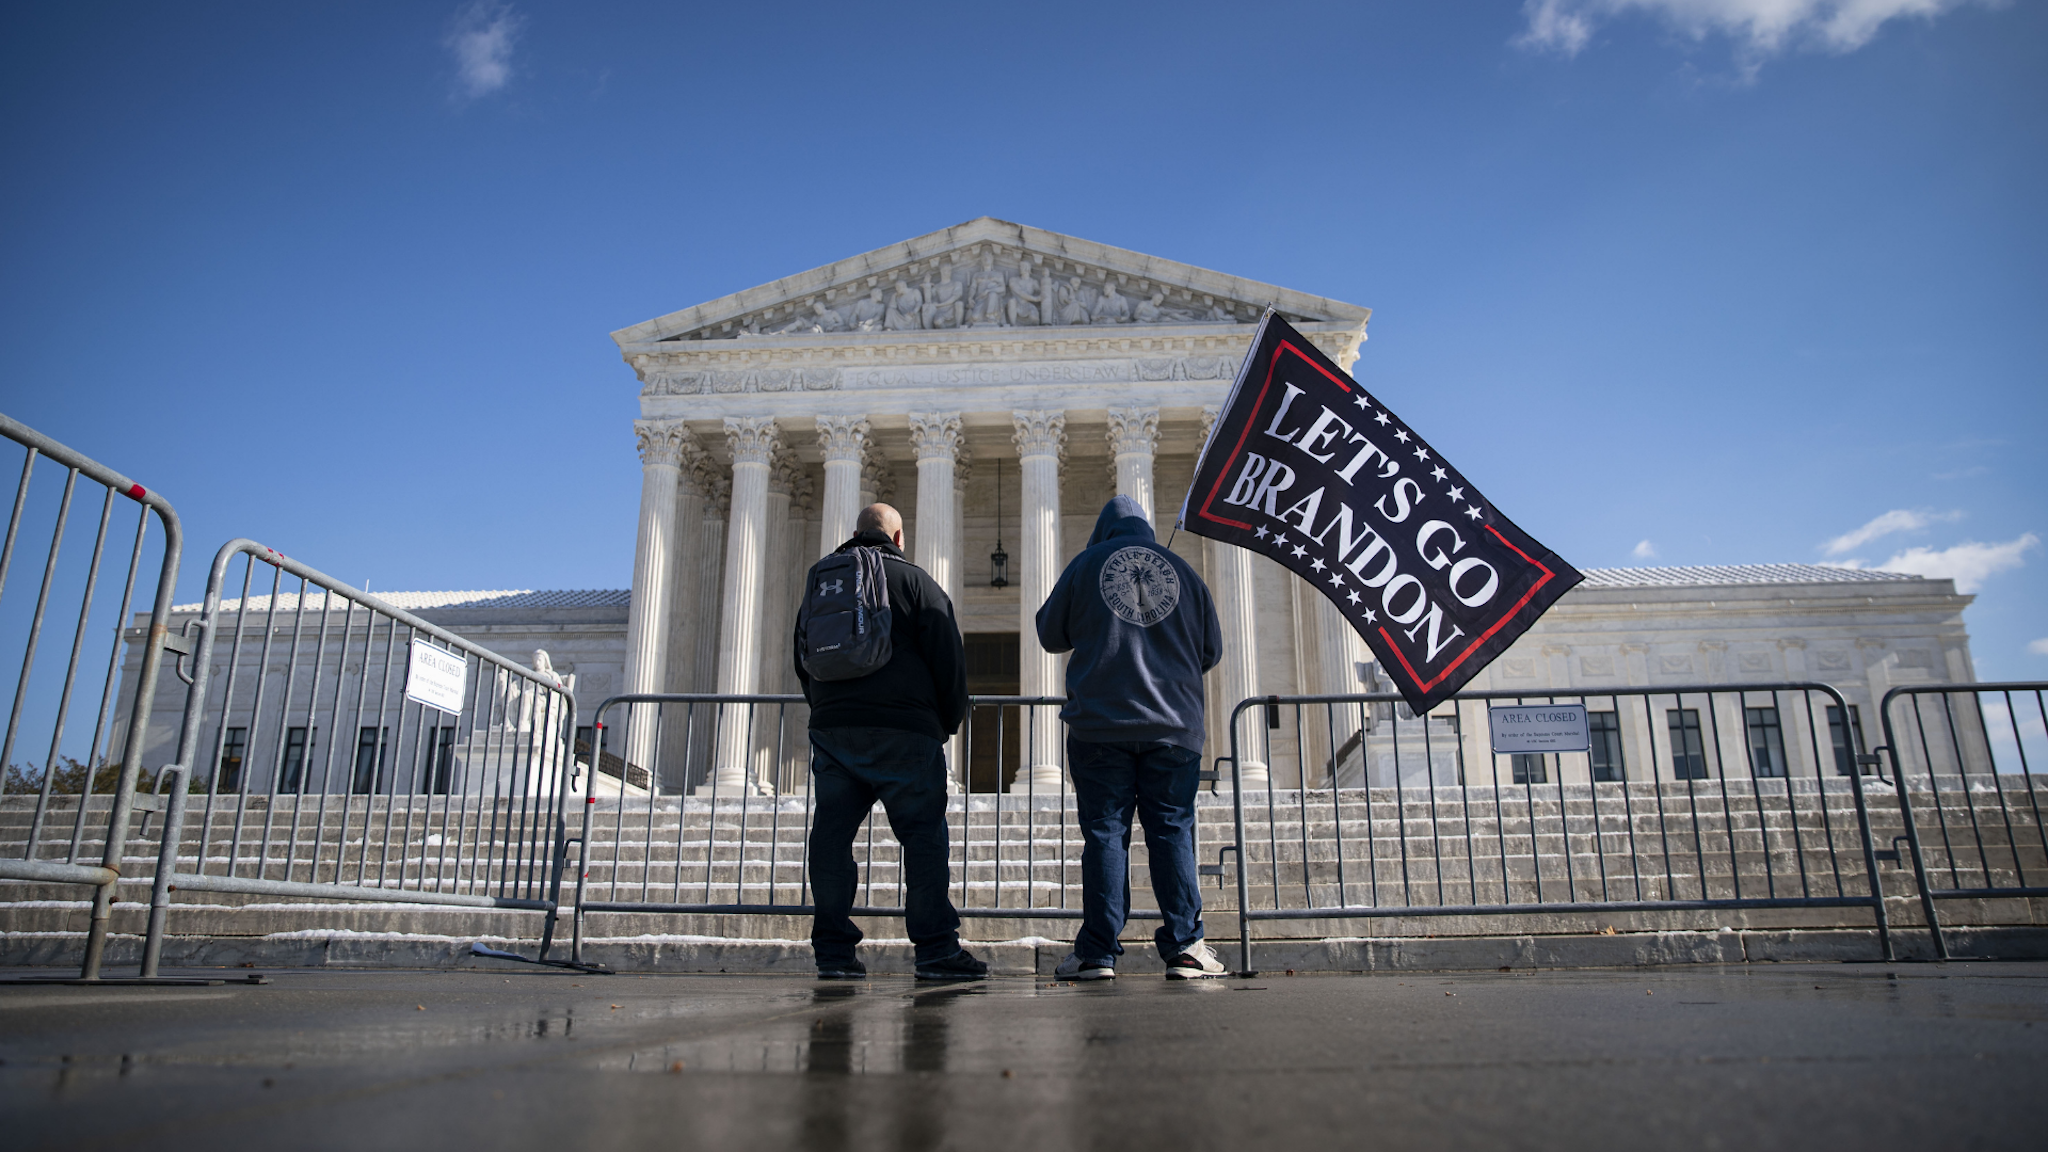 A demonstrator waves a "Let's Go Brandon" flag outside of the U.S. Supreme Court during arguments on two federal coronavirus vaccine mandate measures in Washington, D.C., U.S., on Friday, Jan. 7, 2022.